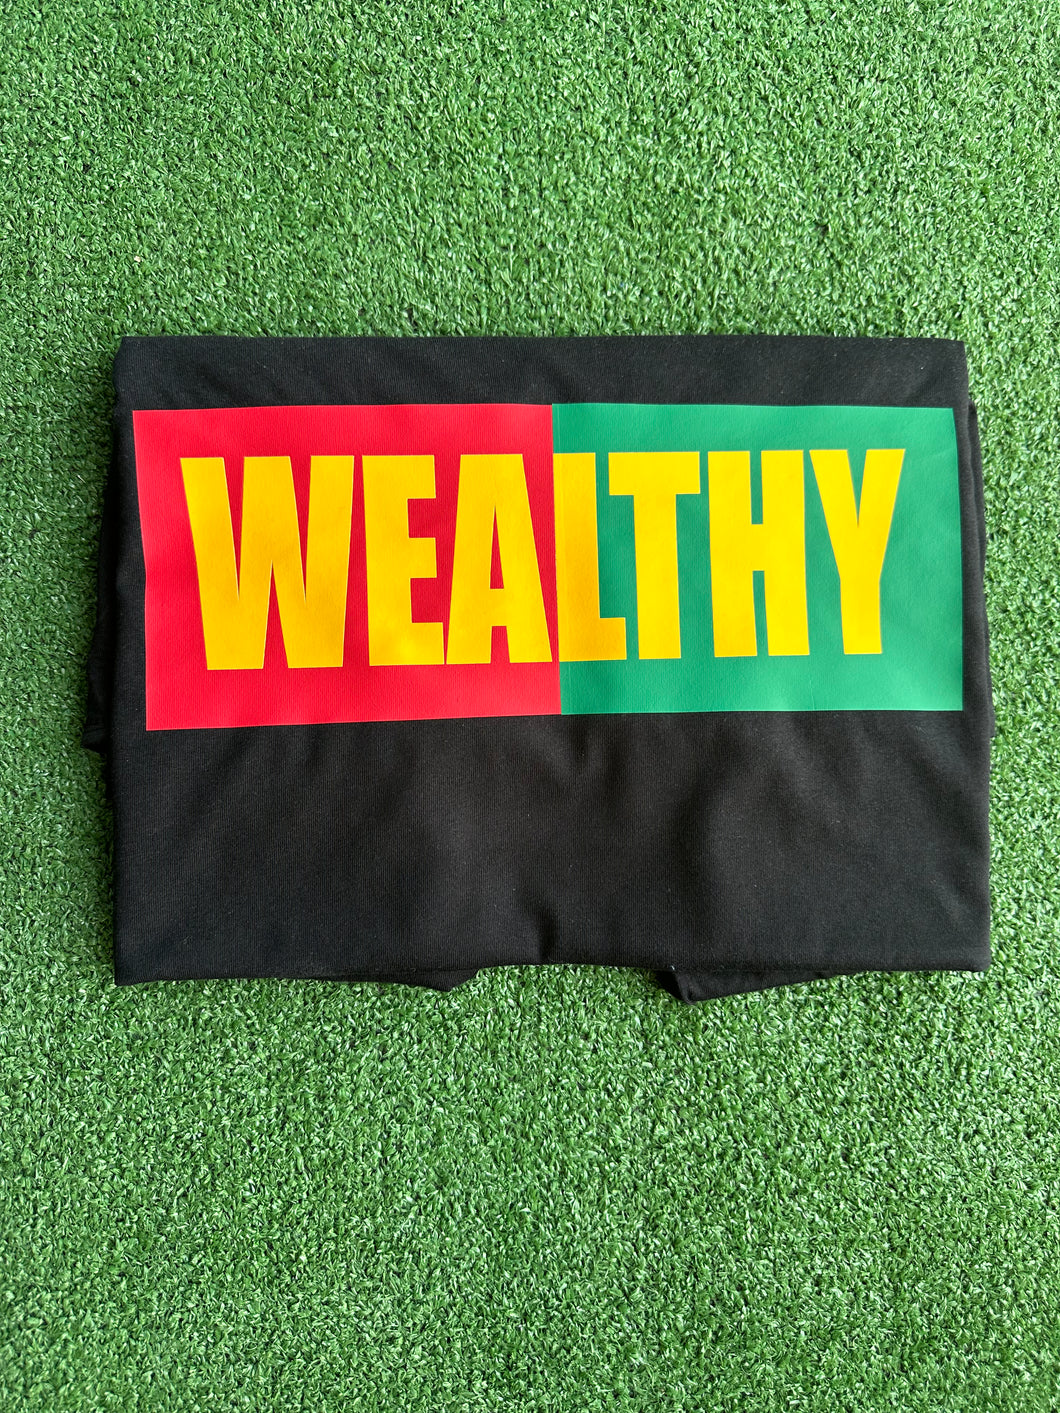 Wealthy Tee (Black/Red/Green/Yellow)